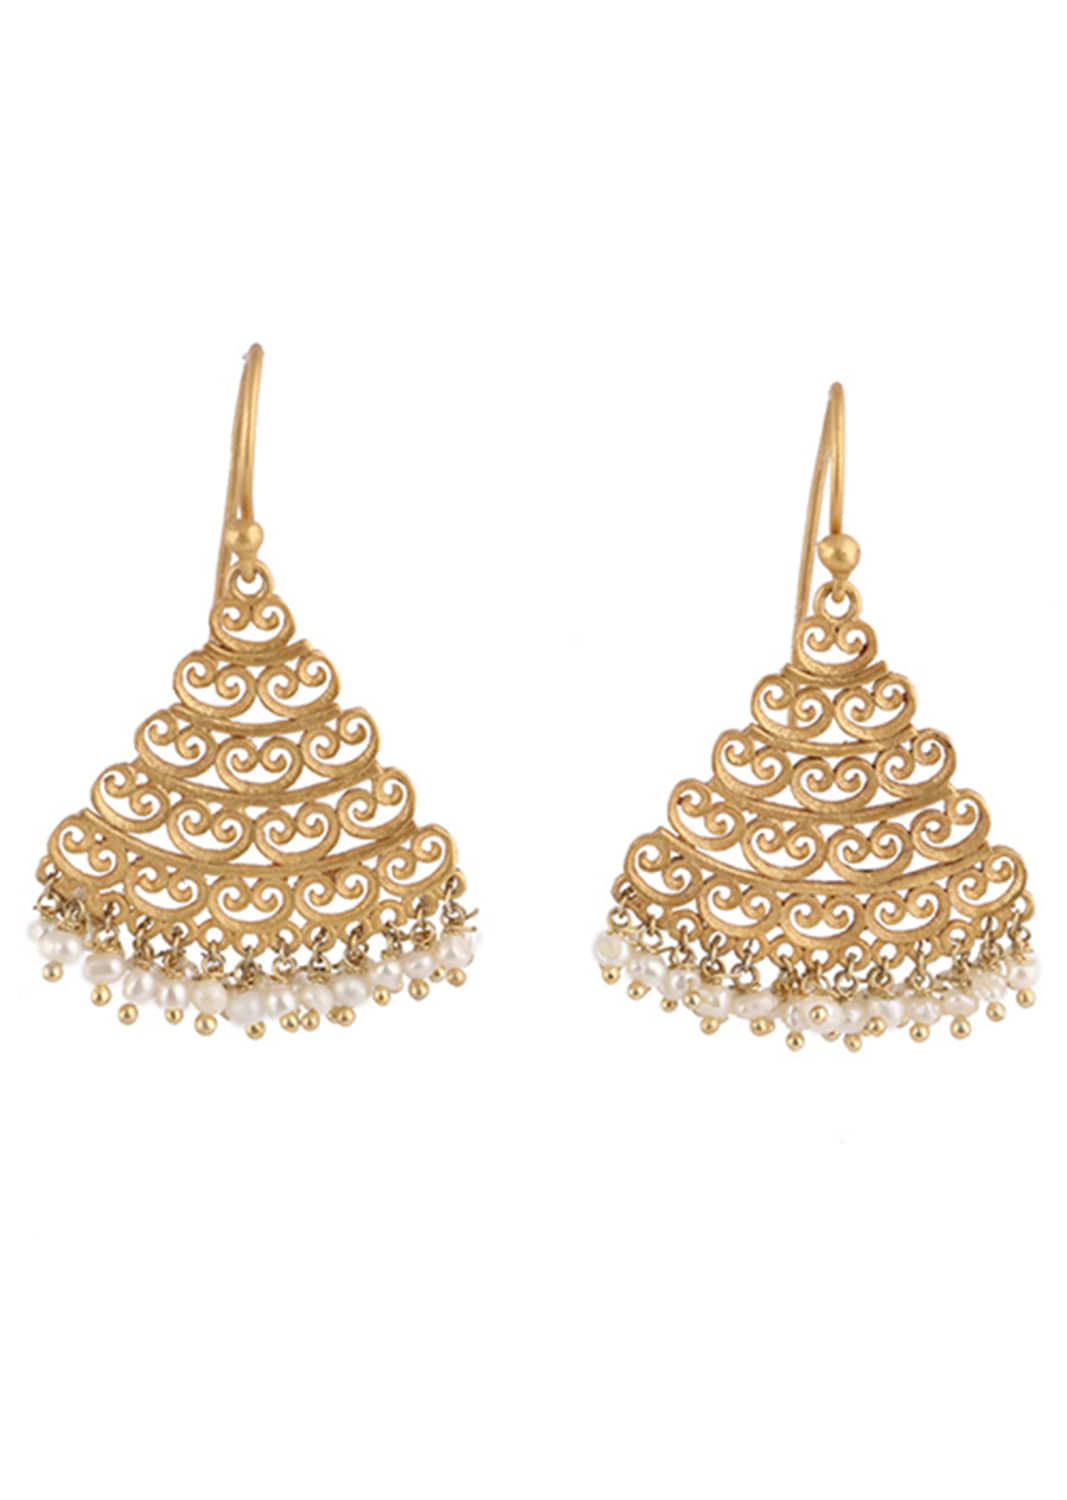 Gold Plated Earrings With Beautiful Triangular Filigree Motifs And Pearl Beads By Zariin